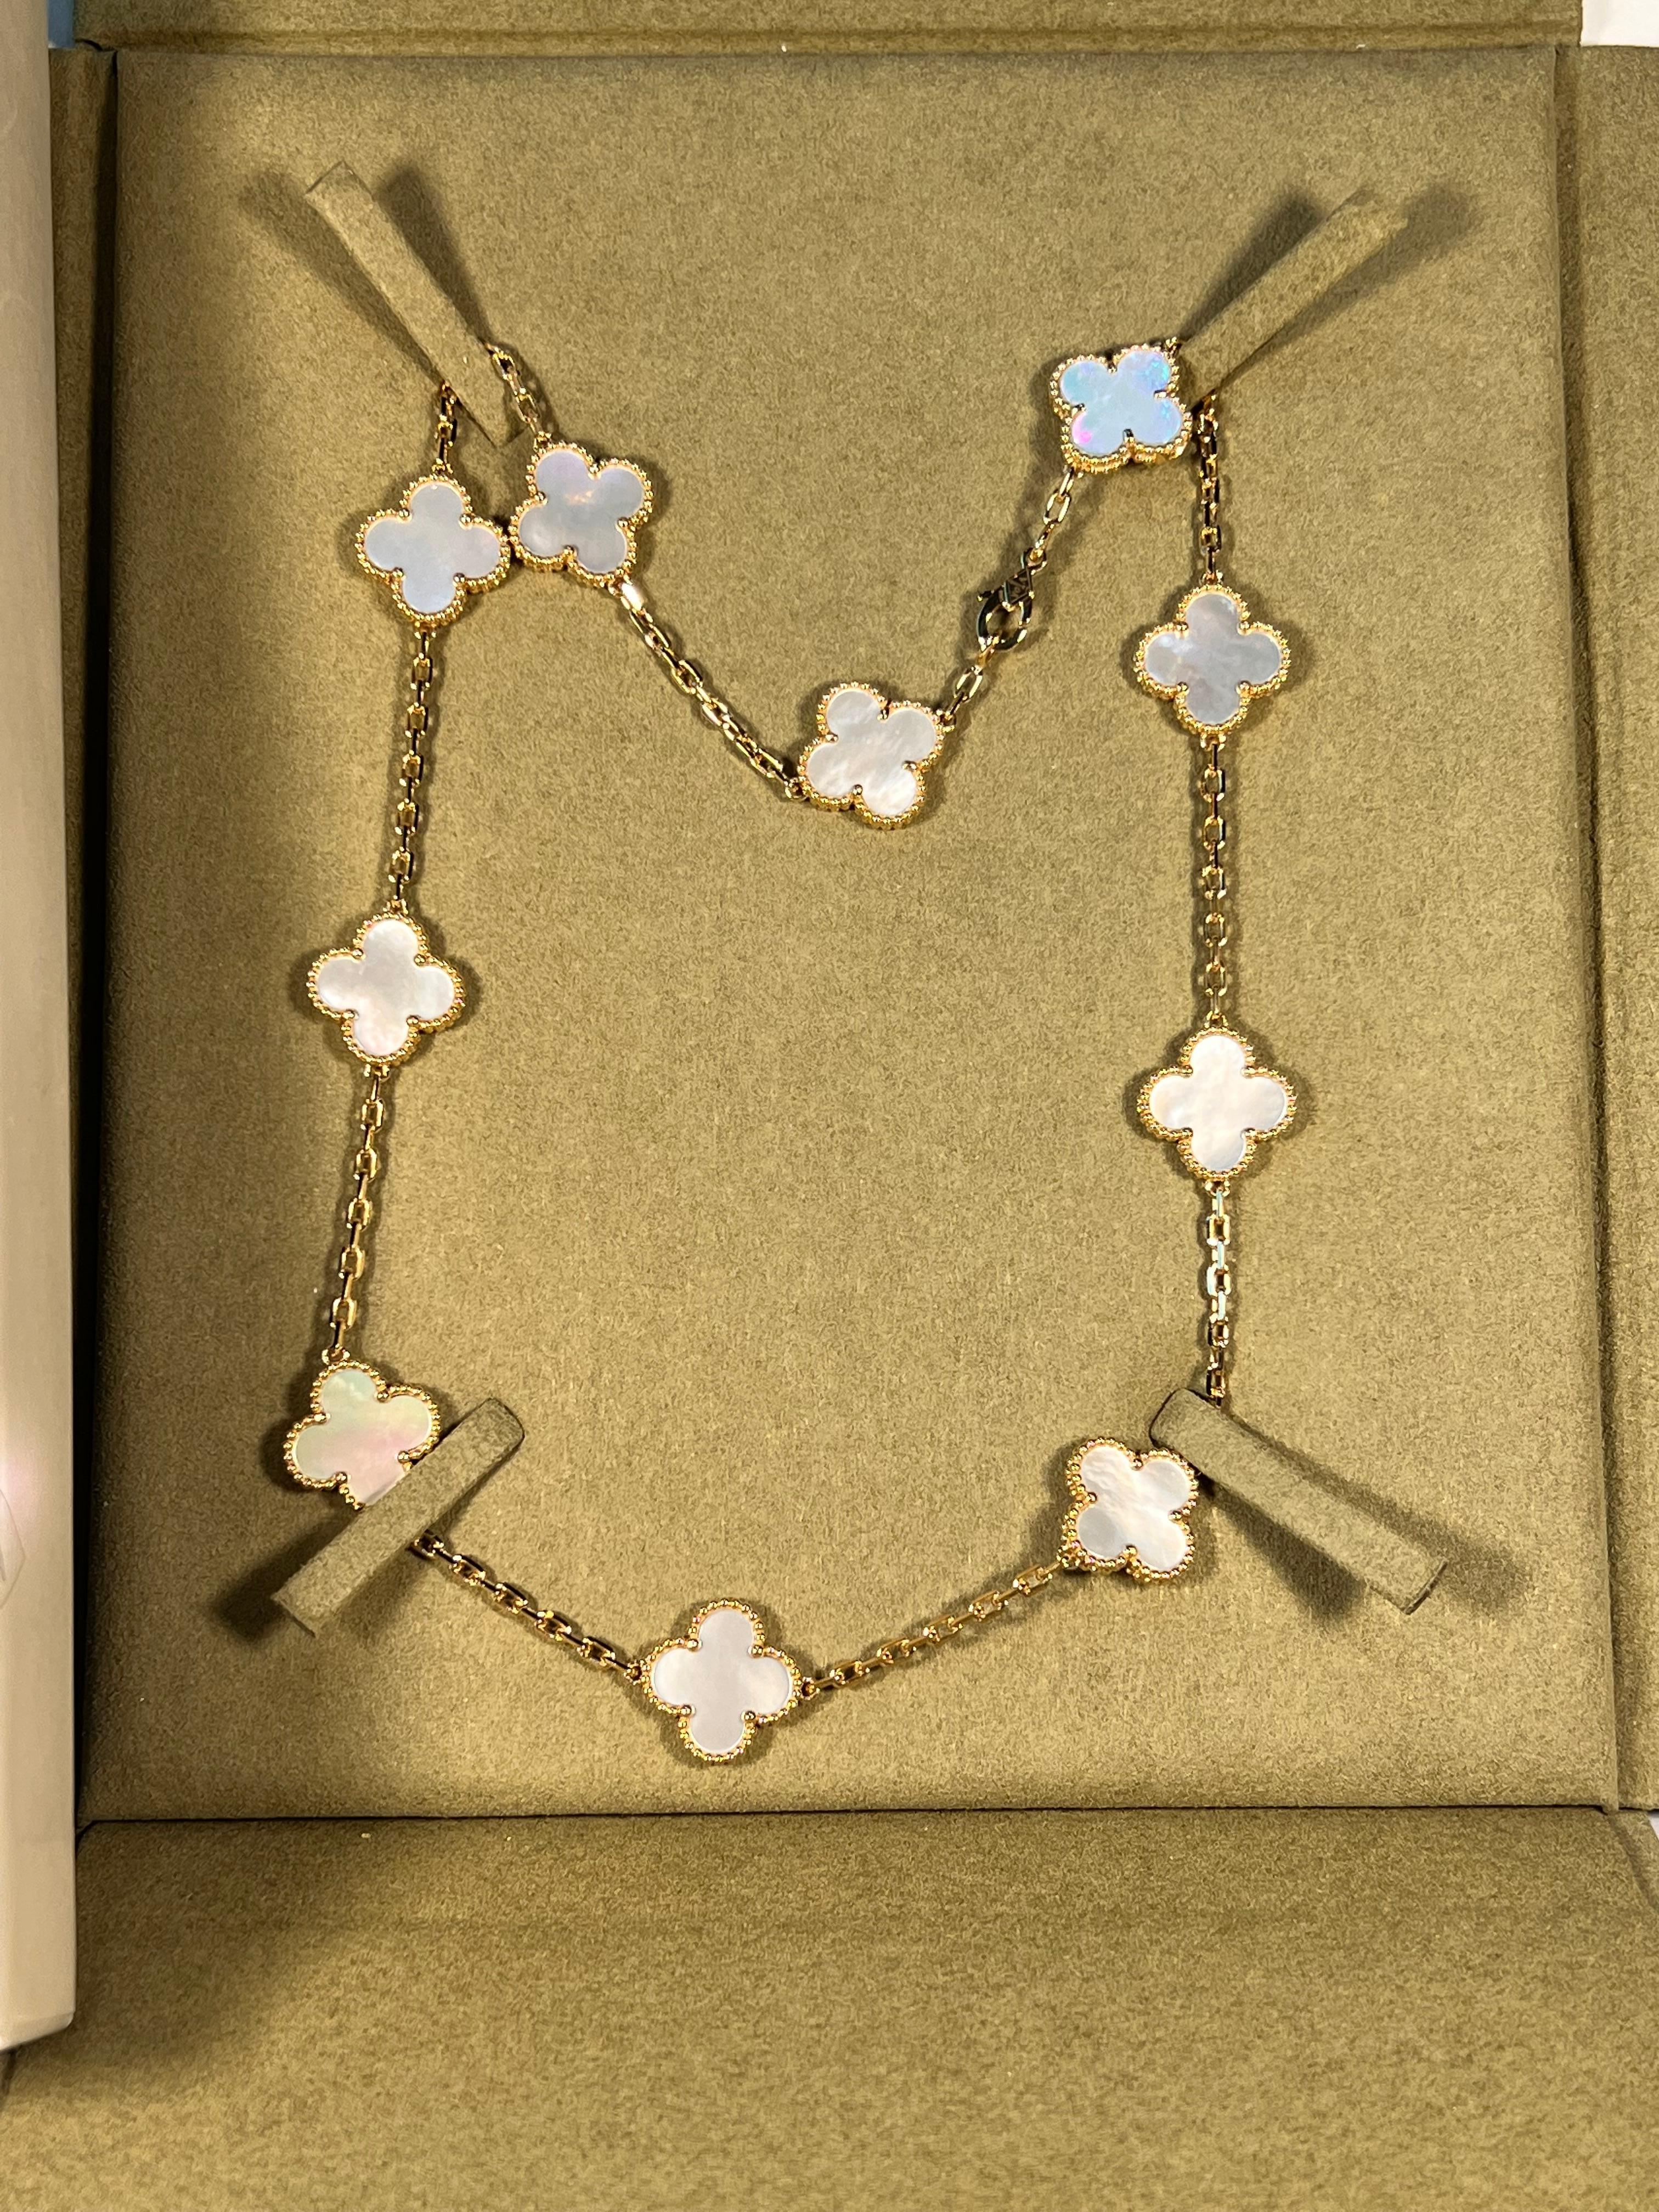 This classic vintage Van Cleef & Arpels necklace is crafted in 18k yellow gold and features 10 lucky clover motifs inlaid with mother of pearl  in round bead settings. Made in France circa 2000. Measurements: 0.59